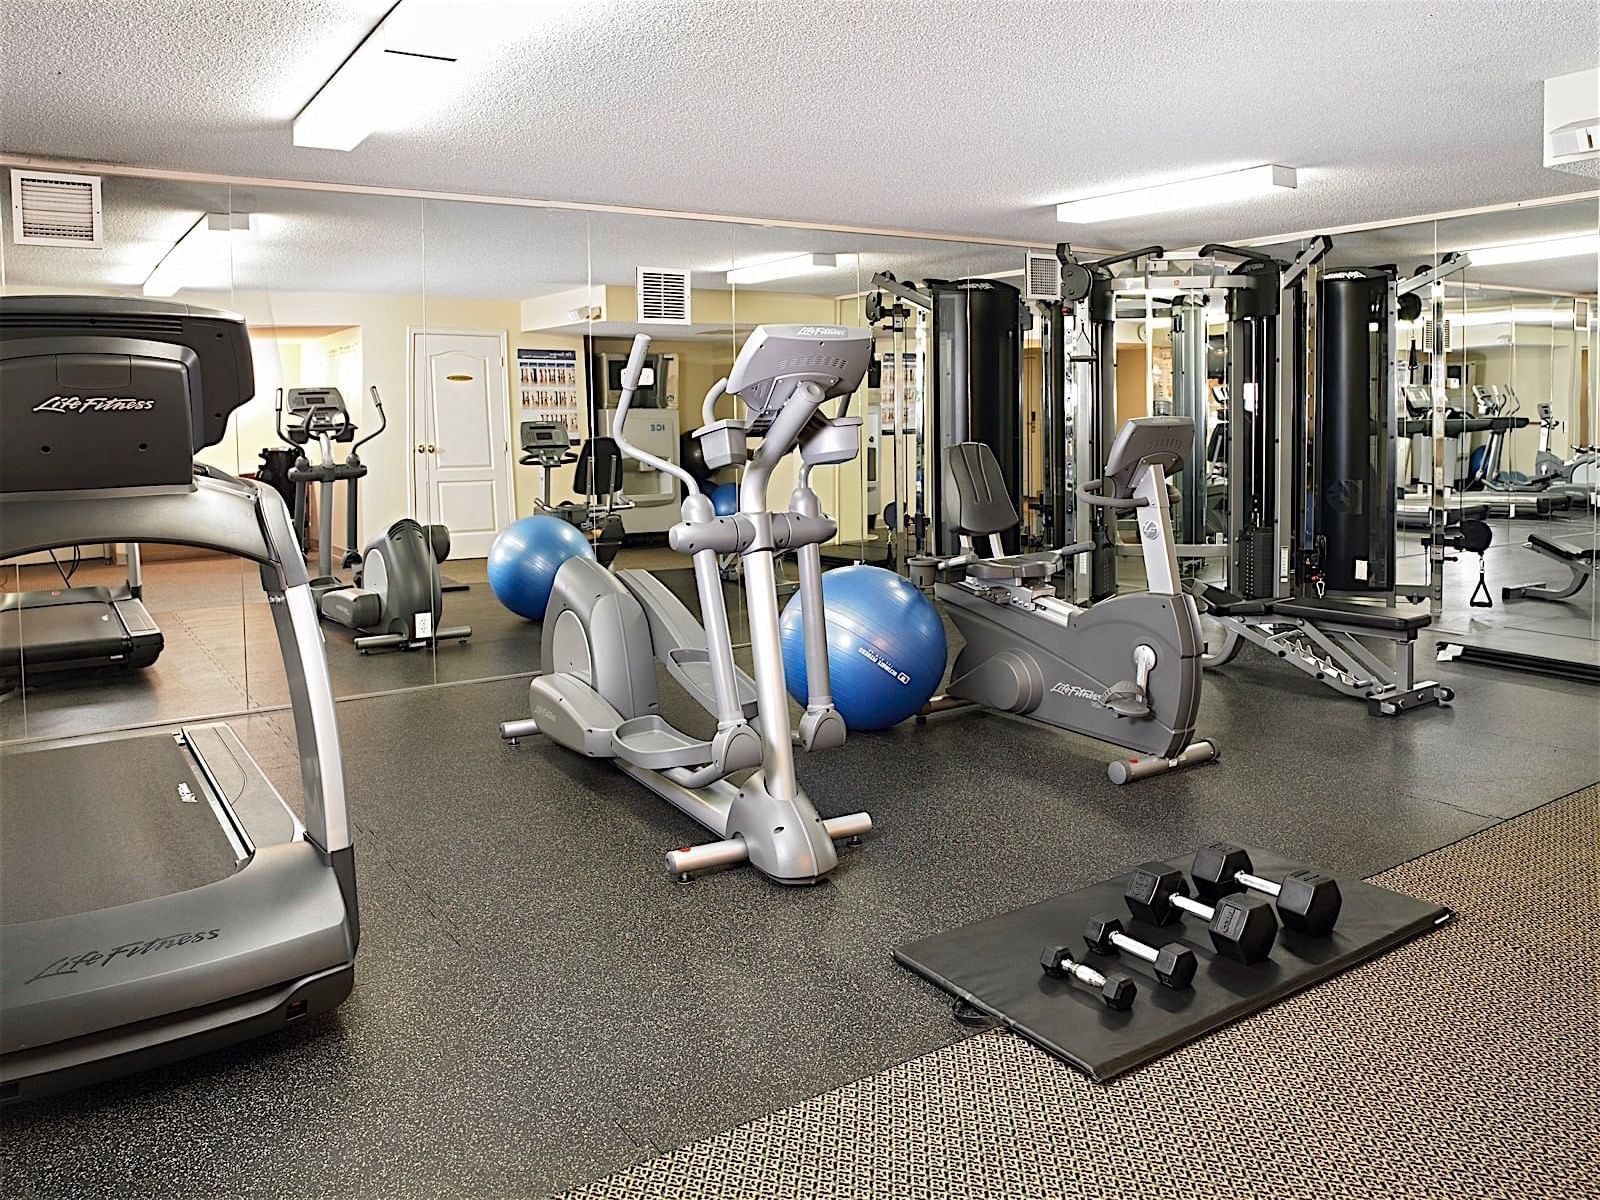 Dumbells, Cardio machines & other training equipment in hotel fitness center at Varscona Hotel on Whyte